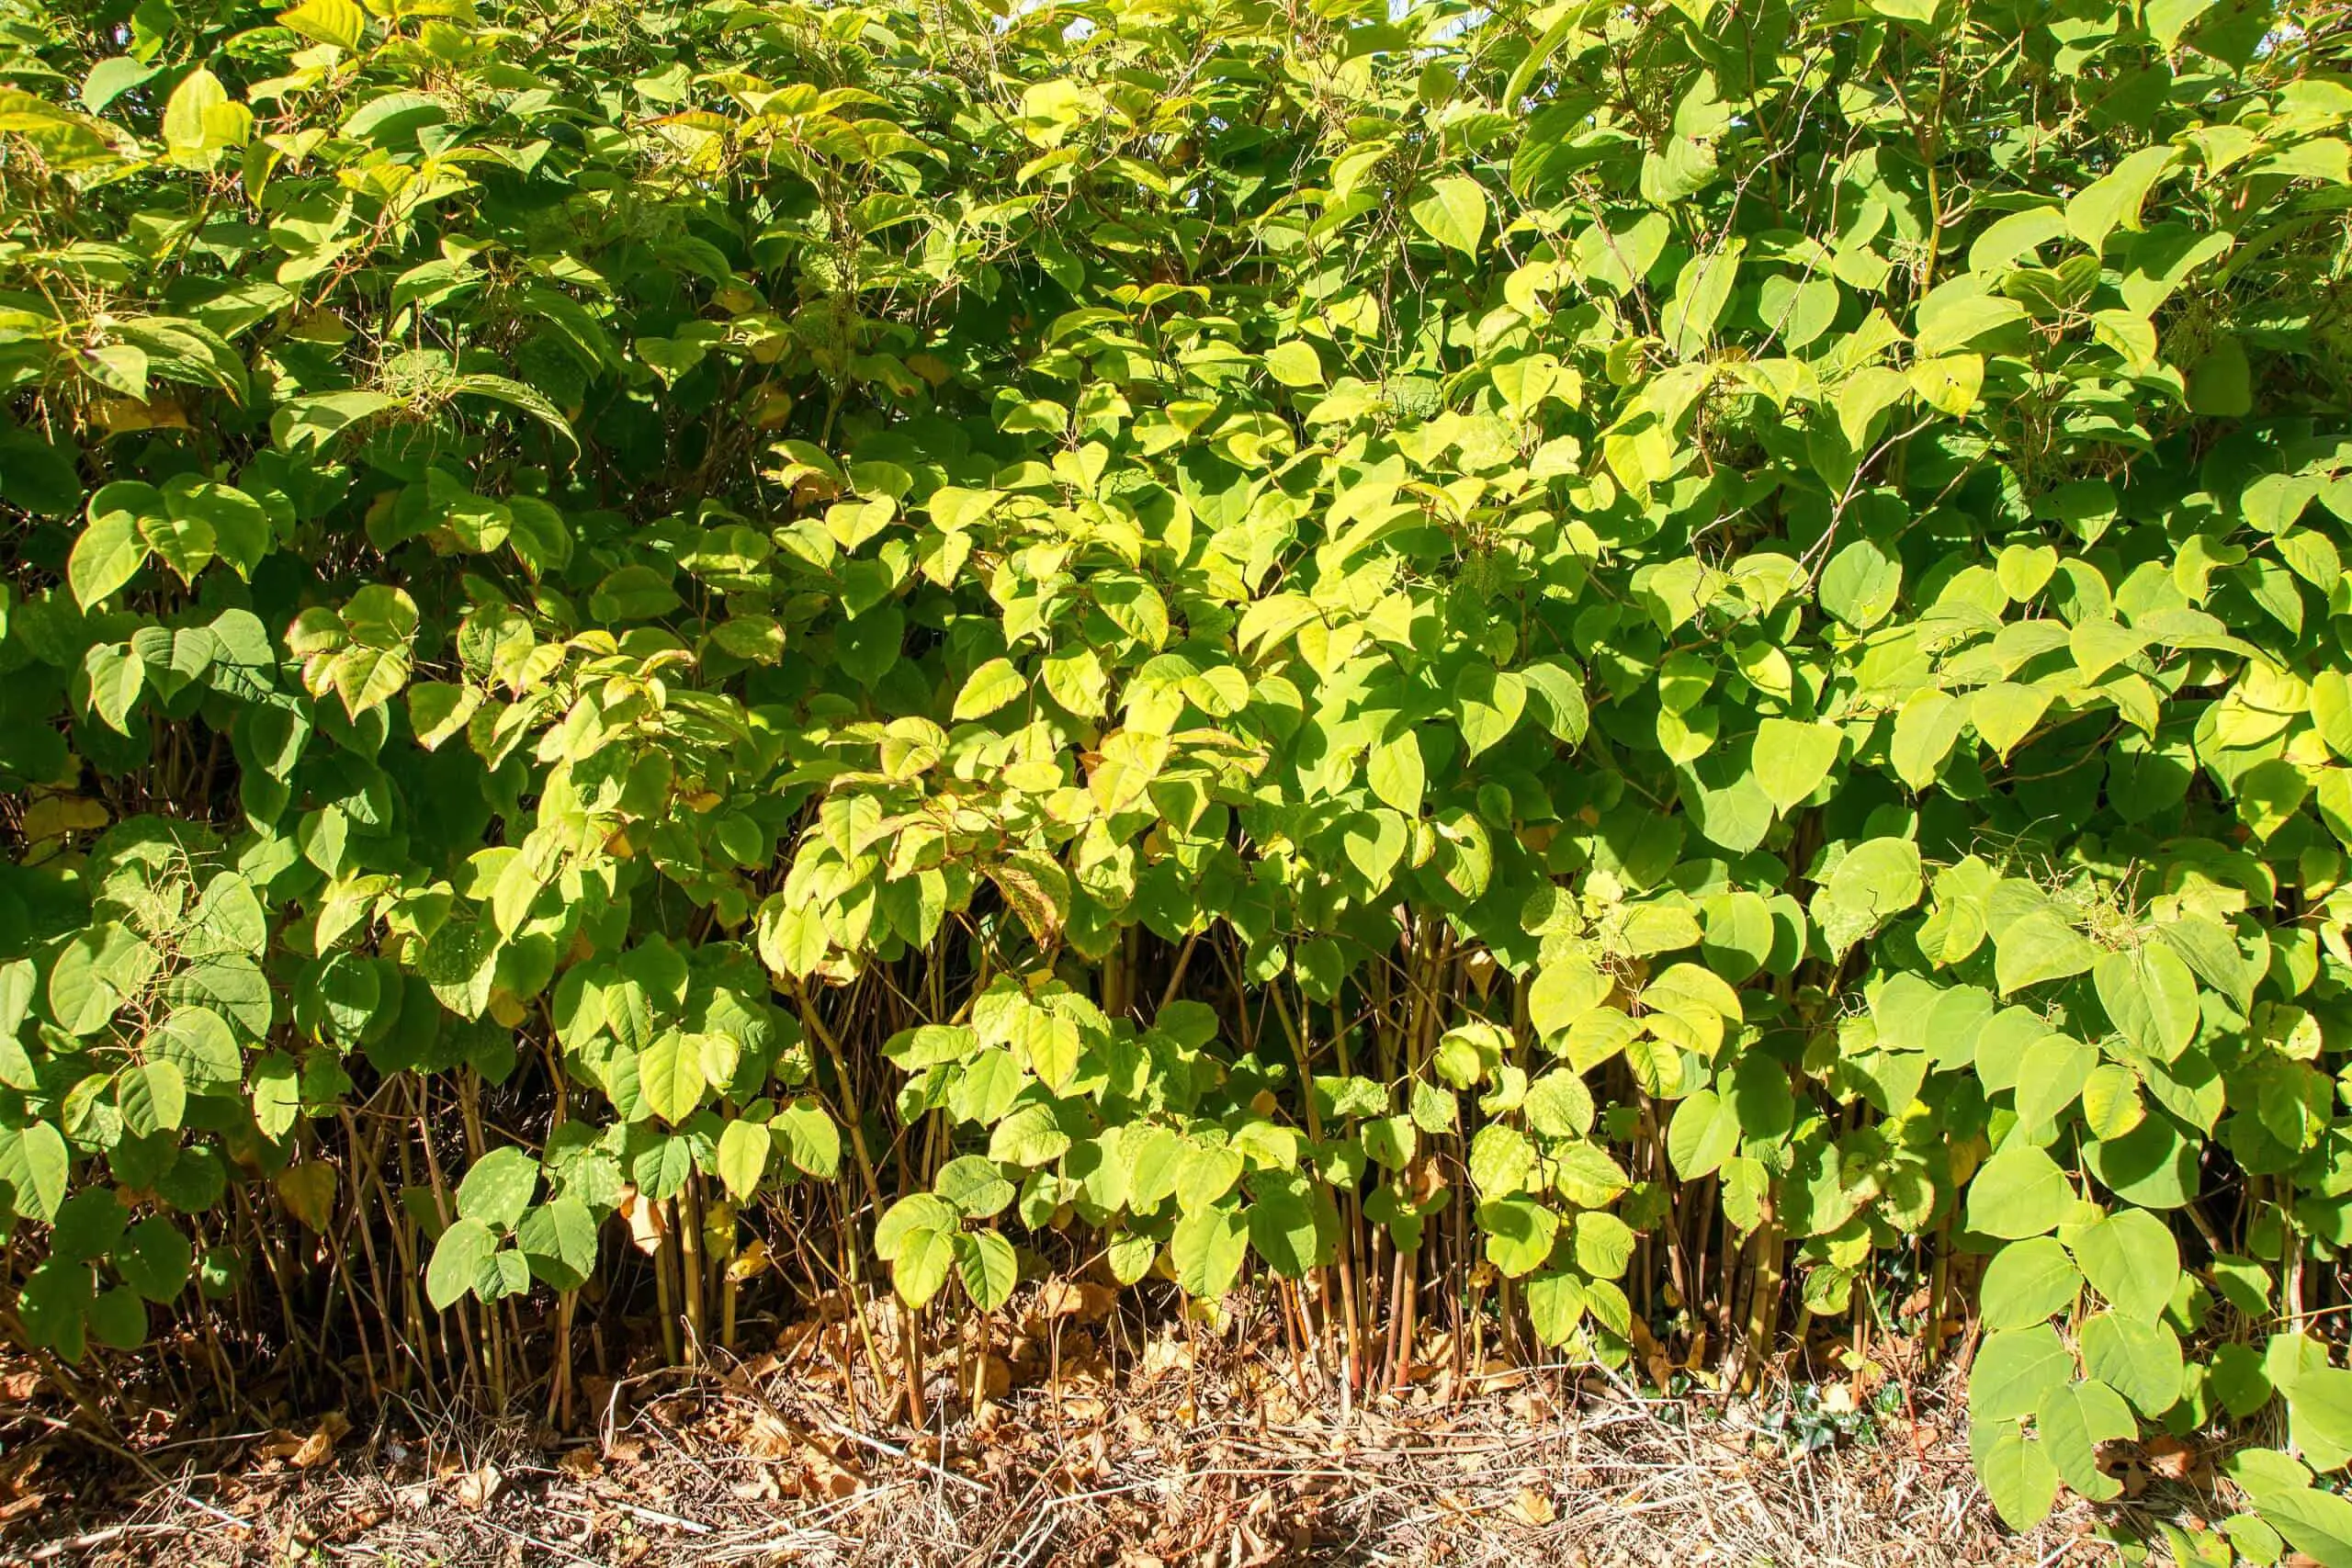 During the summer months, Japanese knotweed will excel by growing up to 10cm a day